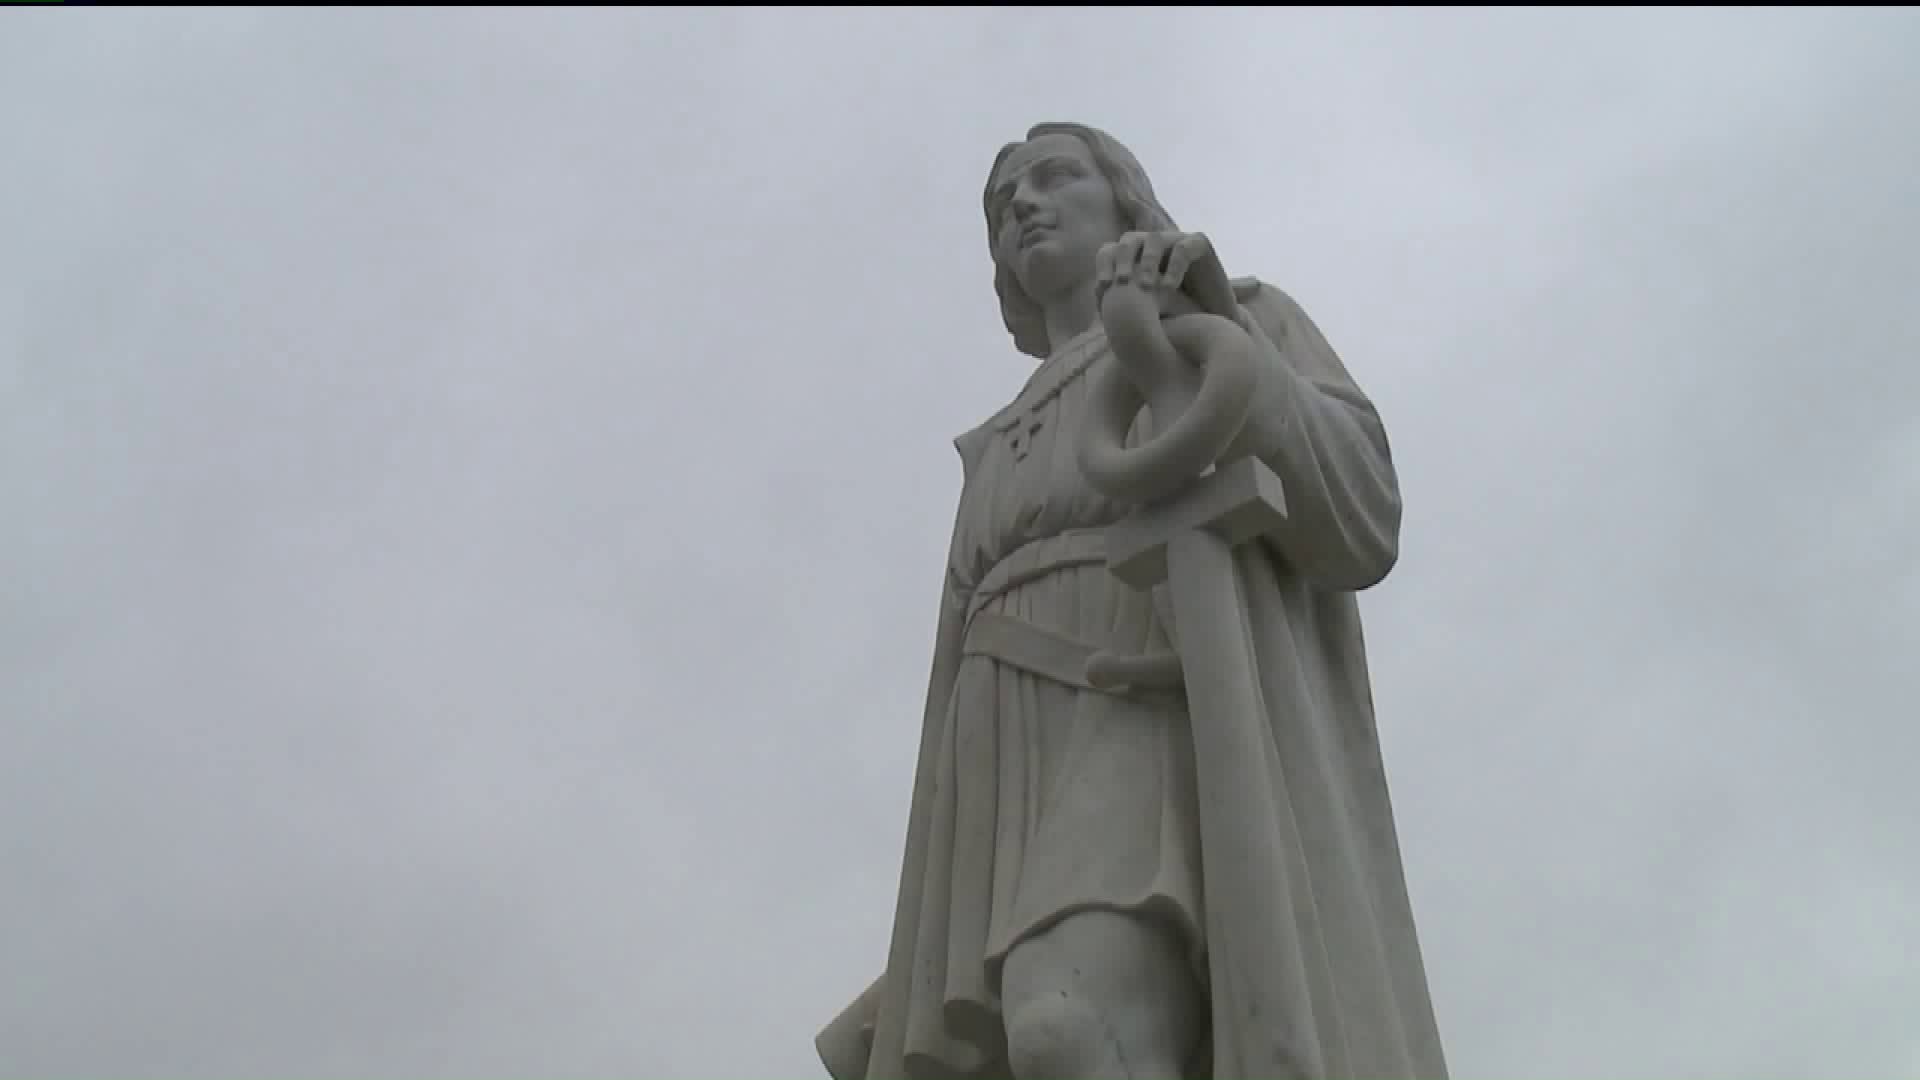 Pittston Columbus Statue Returned to Rightful Place